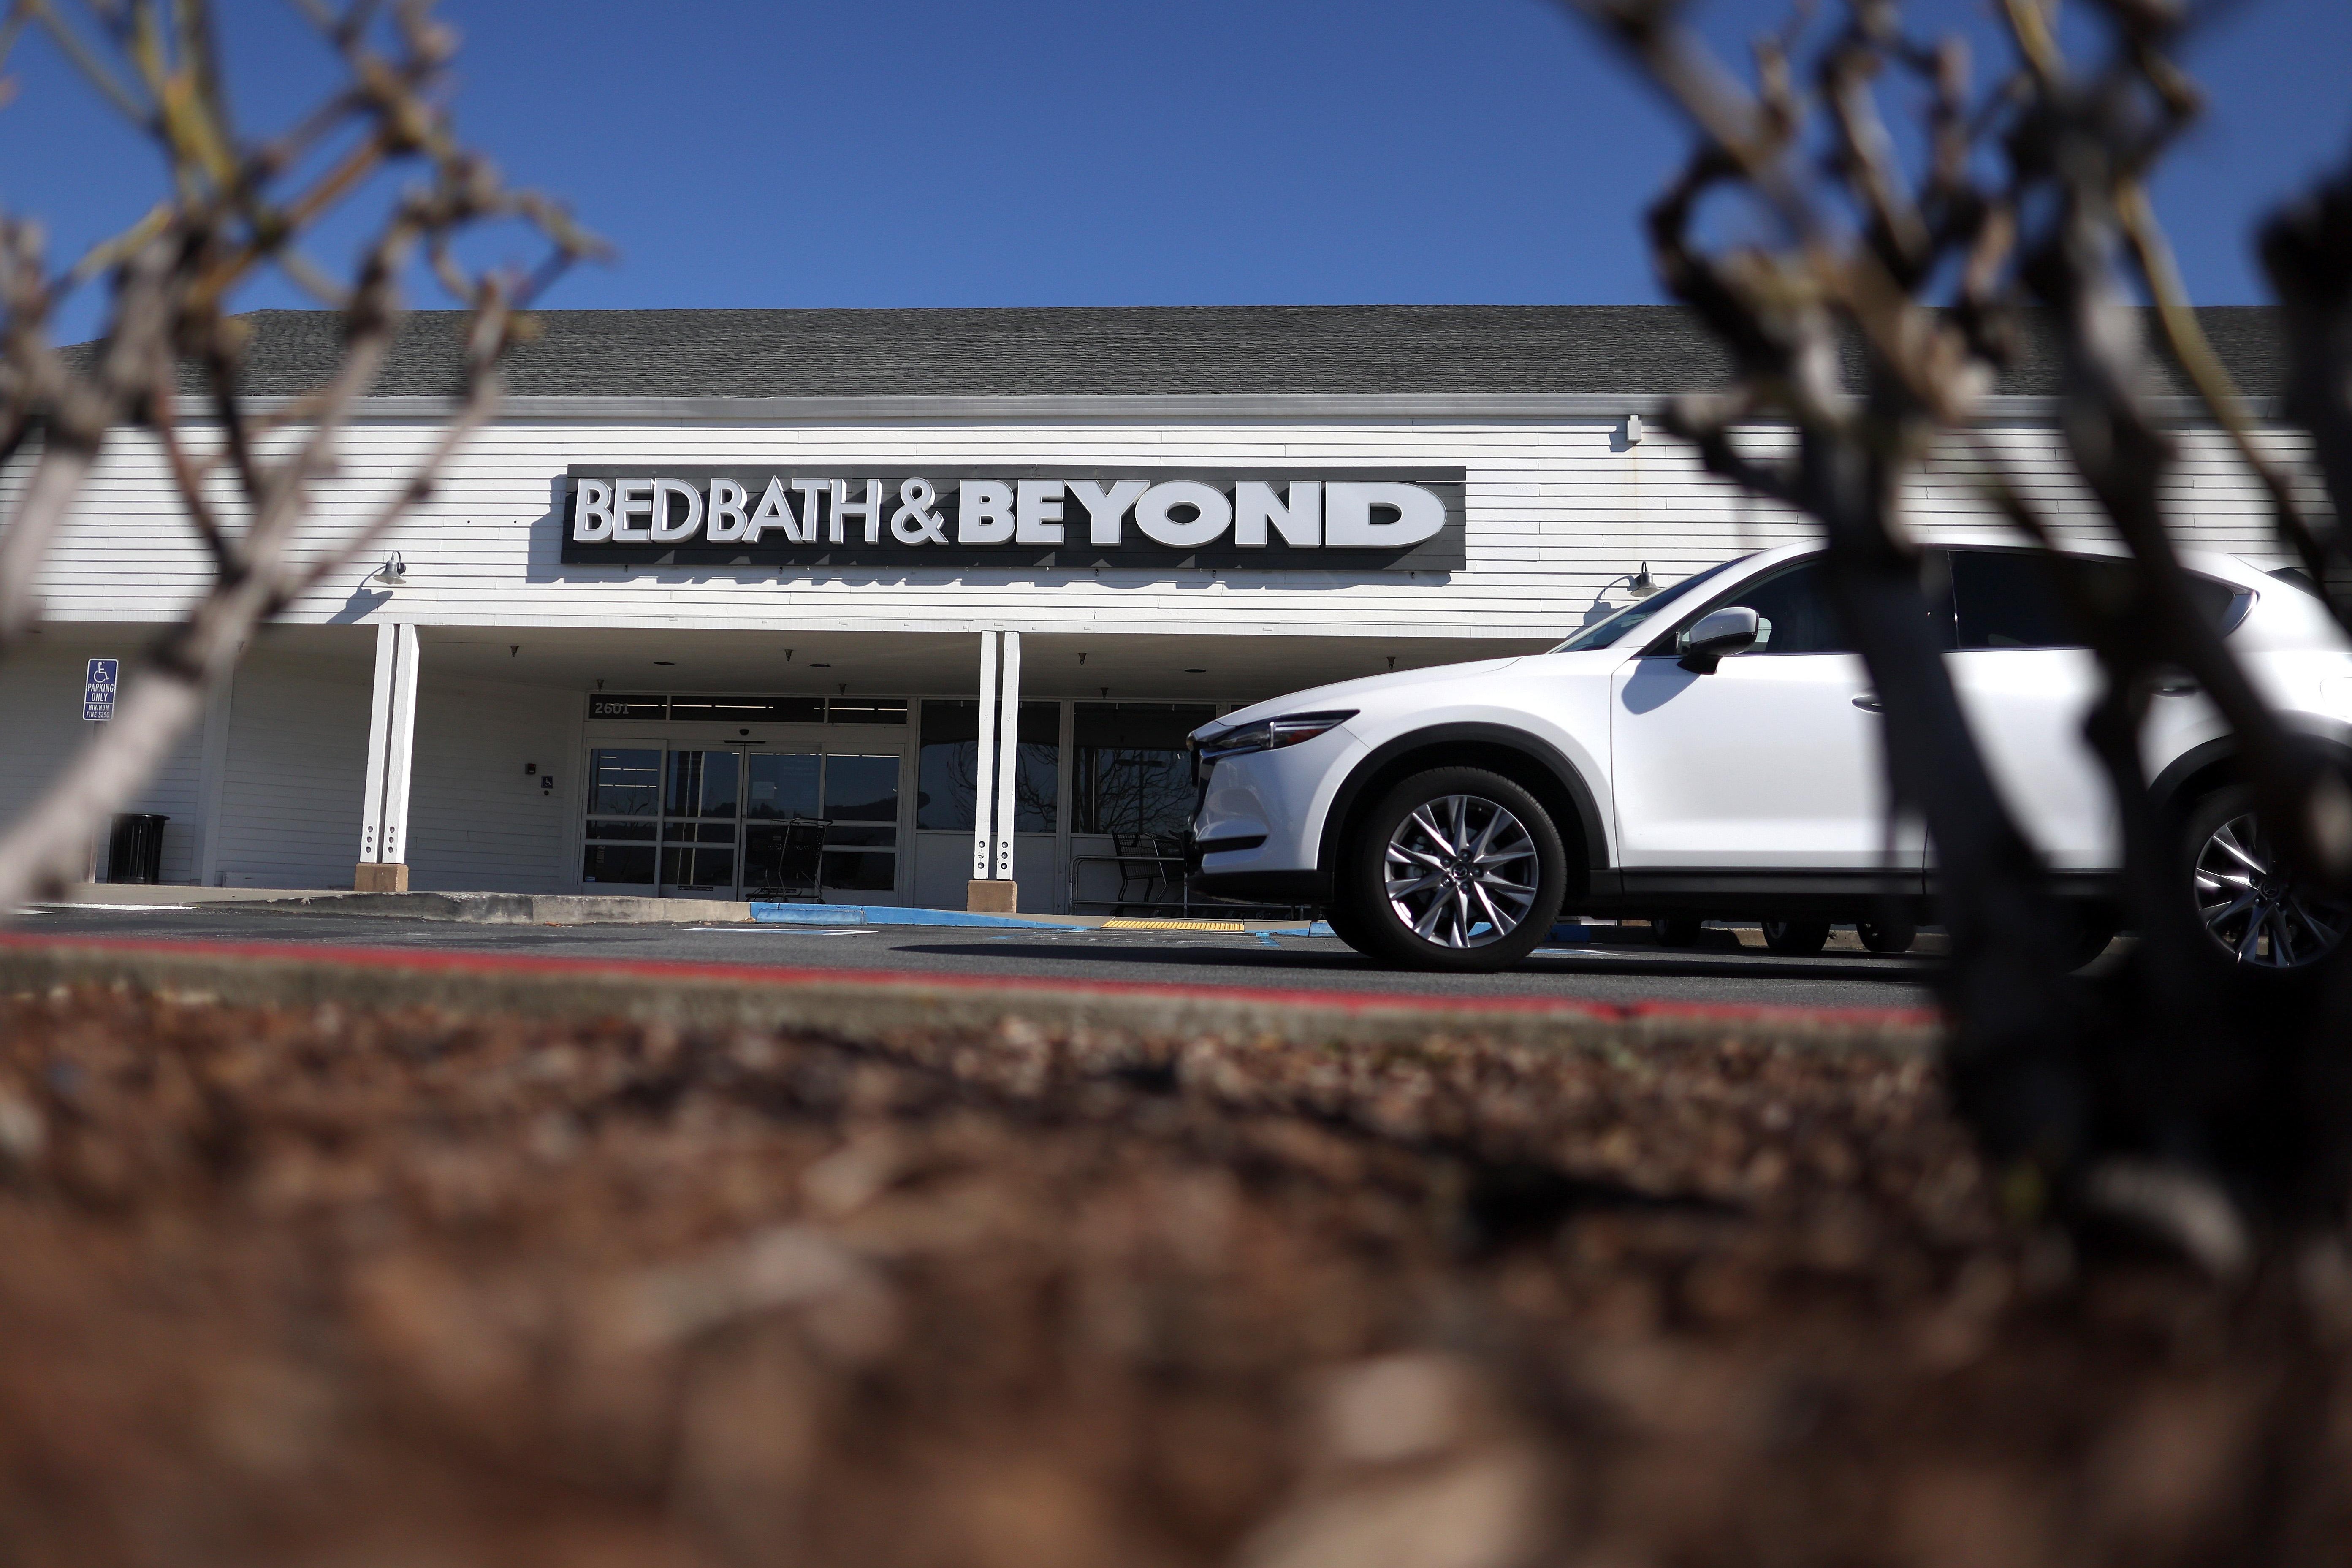 LARKSPUR, CALIFORNIA - FEBRUARY 08: A car drives by a closed Bed Bath and Beyond store on February 08, 2023 in Larkspur, California. One week after home retailer Bed Bath and Beyond announced plans to close 87 of its stores the company added 150 stores to that list of closures in an effort to stave off bankruptcy. (Photo by Justin Sullivan/Getty Images)